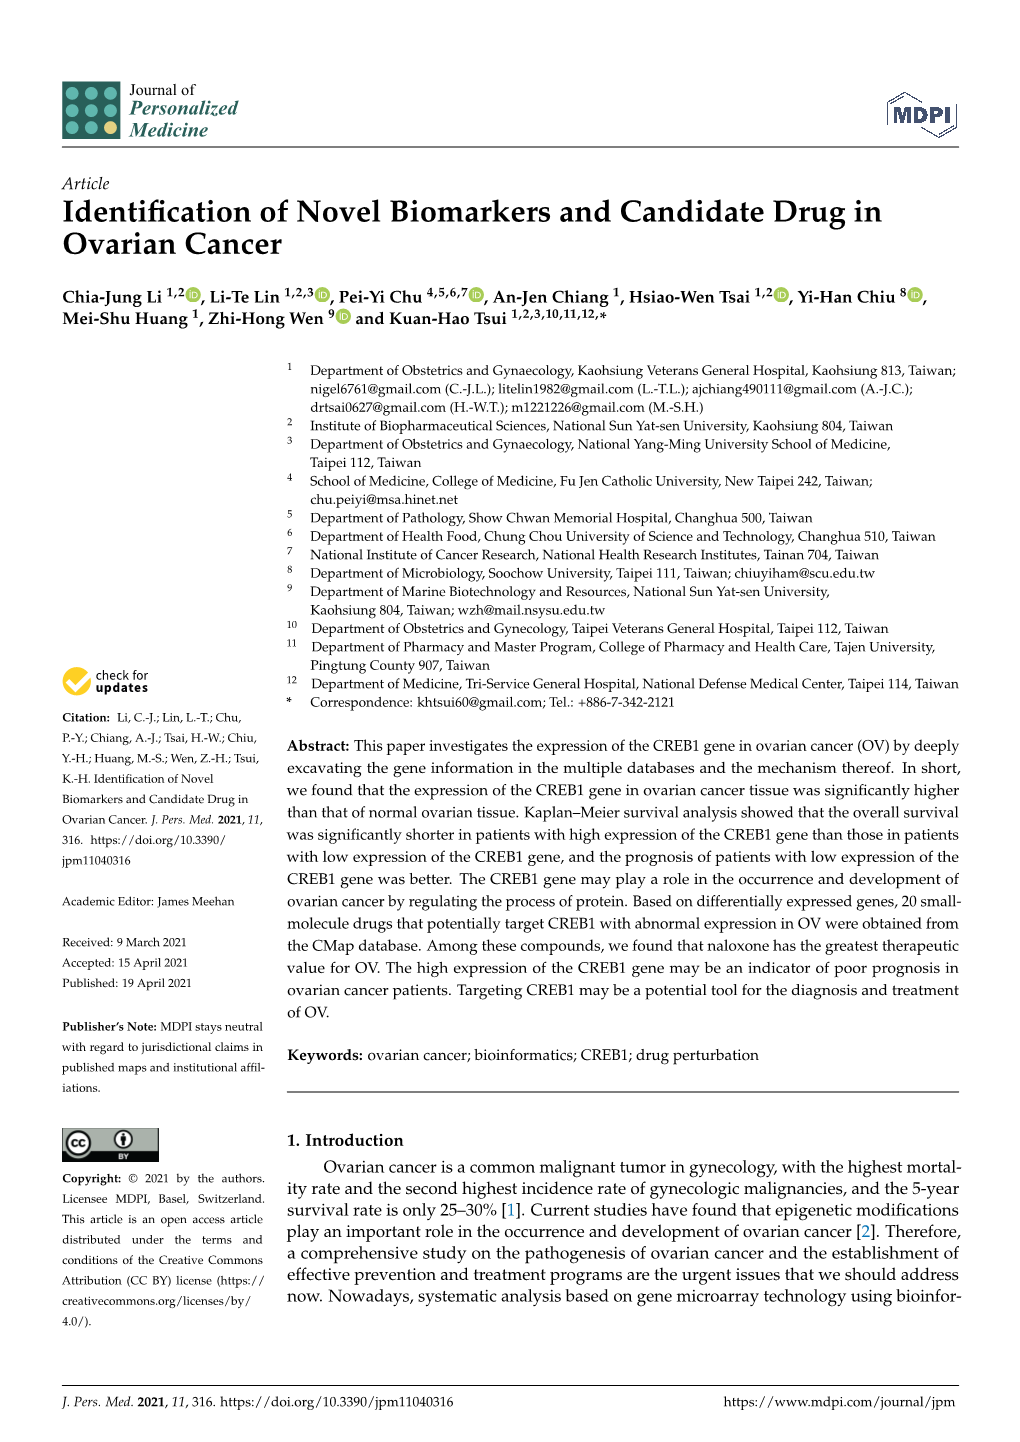 Identification of Novel Biomarkers and Candidate Drug in Ovarian Cancer